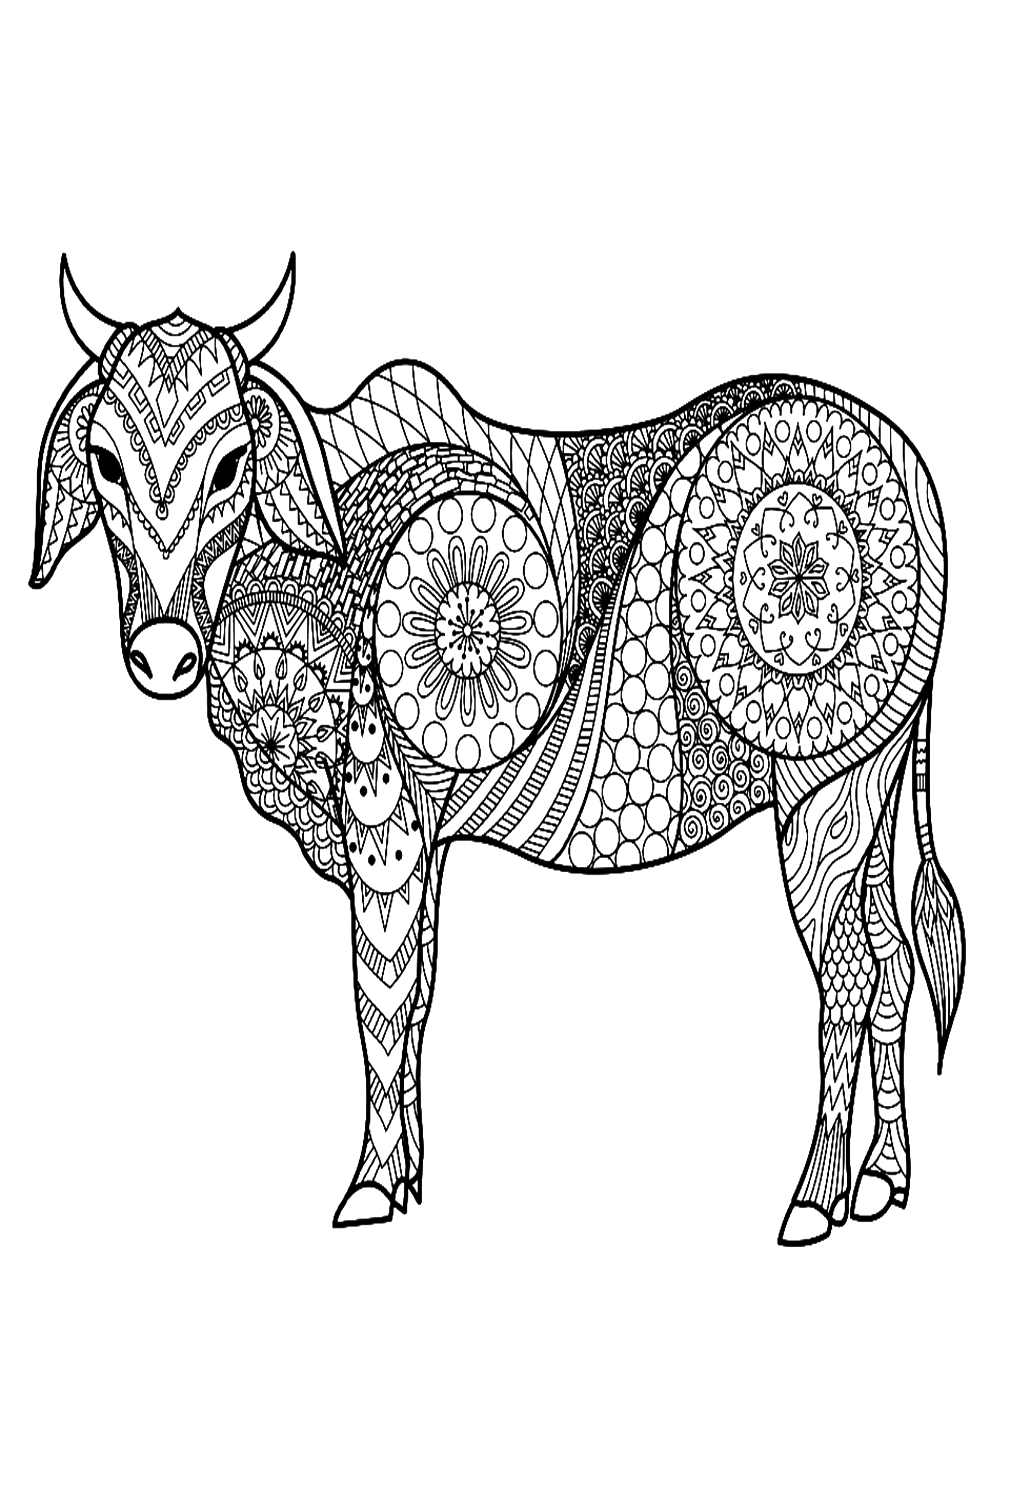 Bull In Zentangle Style Coloring Pages